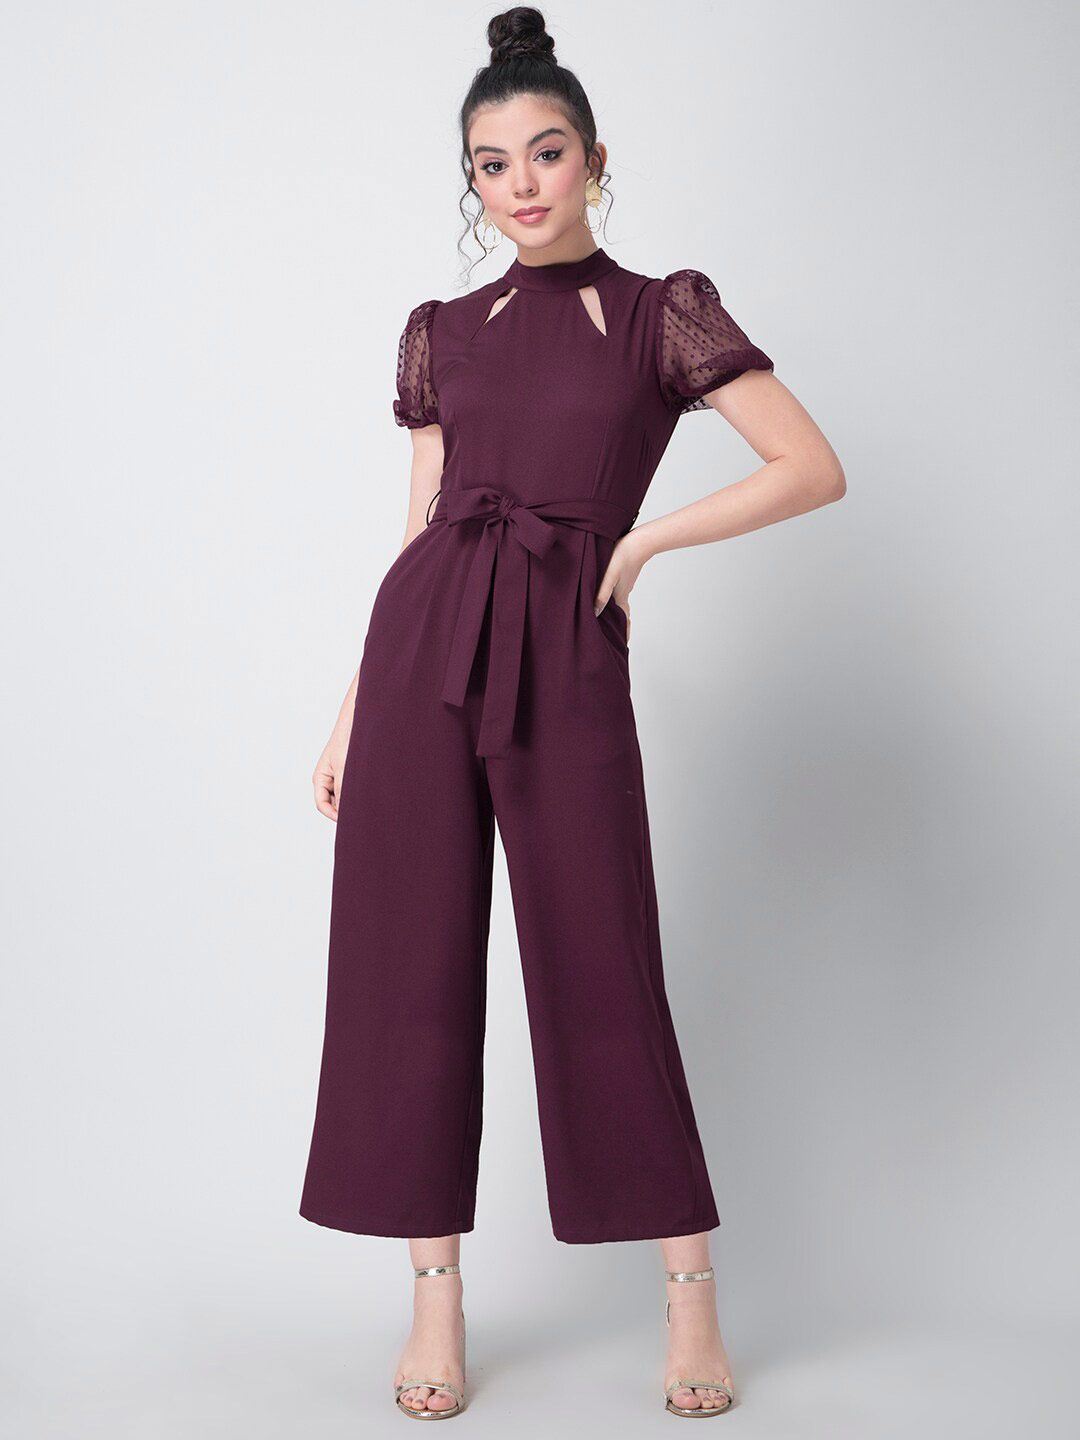 FabAlley Purple Basic Jumpsuit Price in India